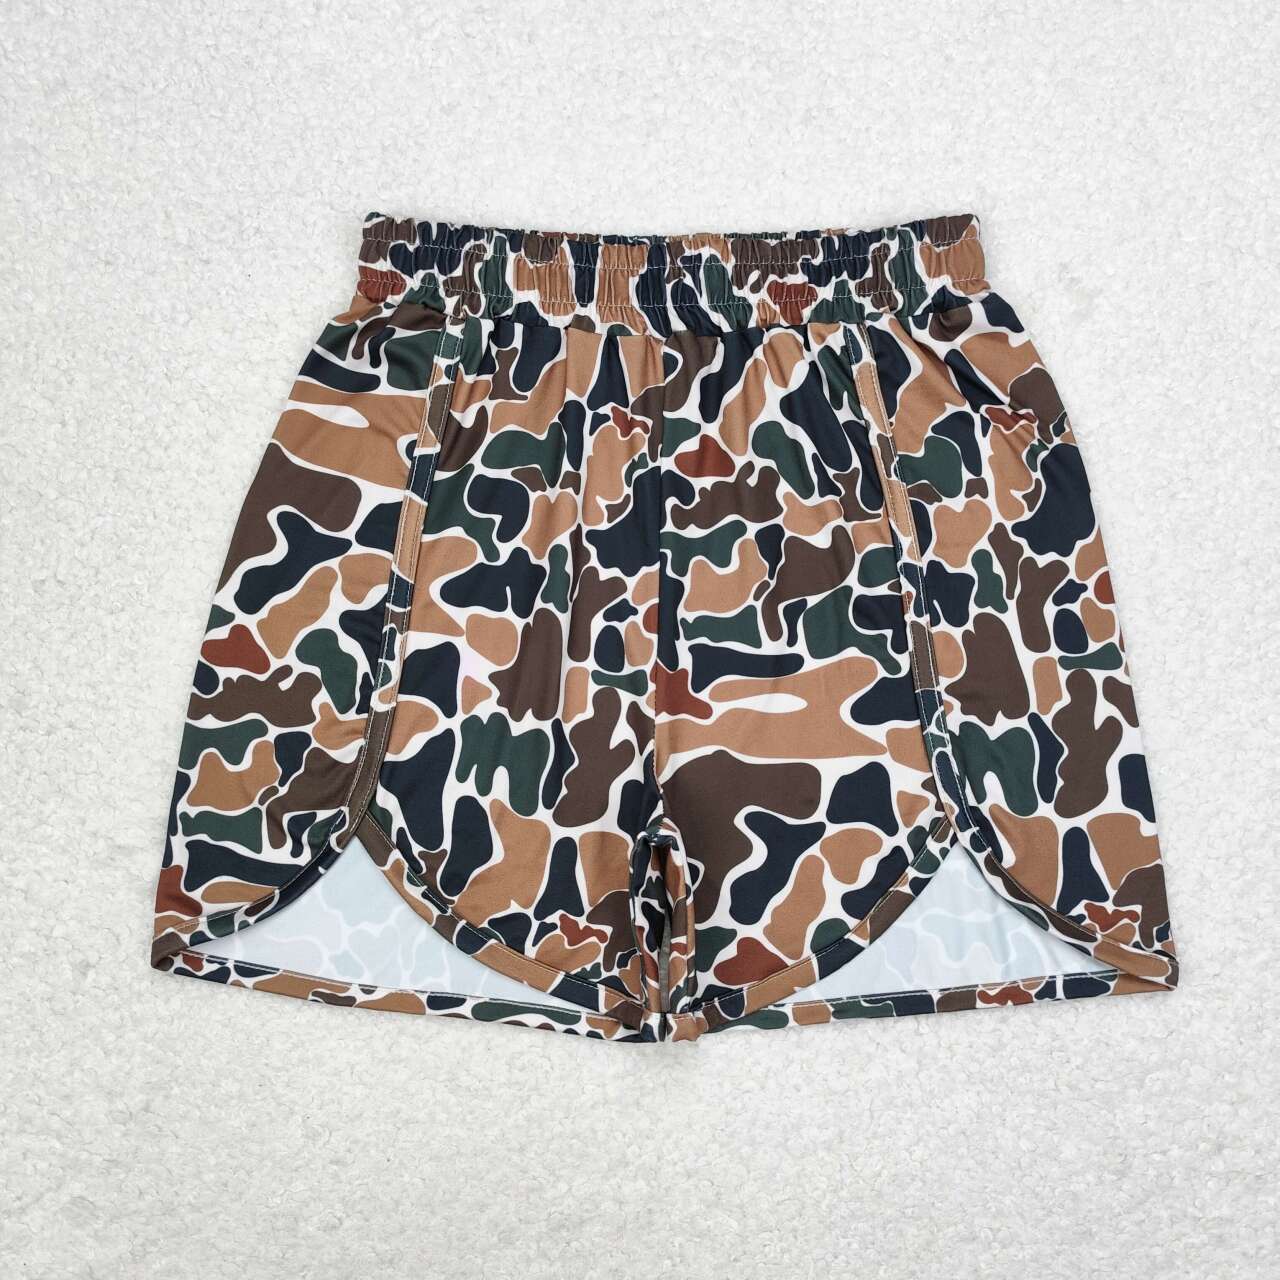 SS0355 Adult women's camouflage beige shorts